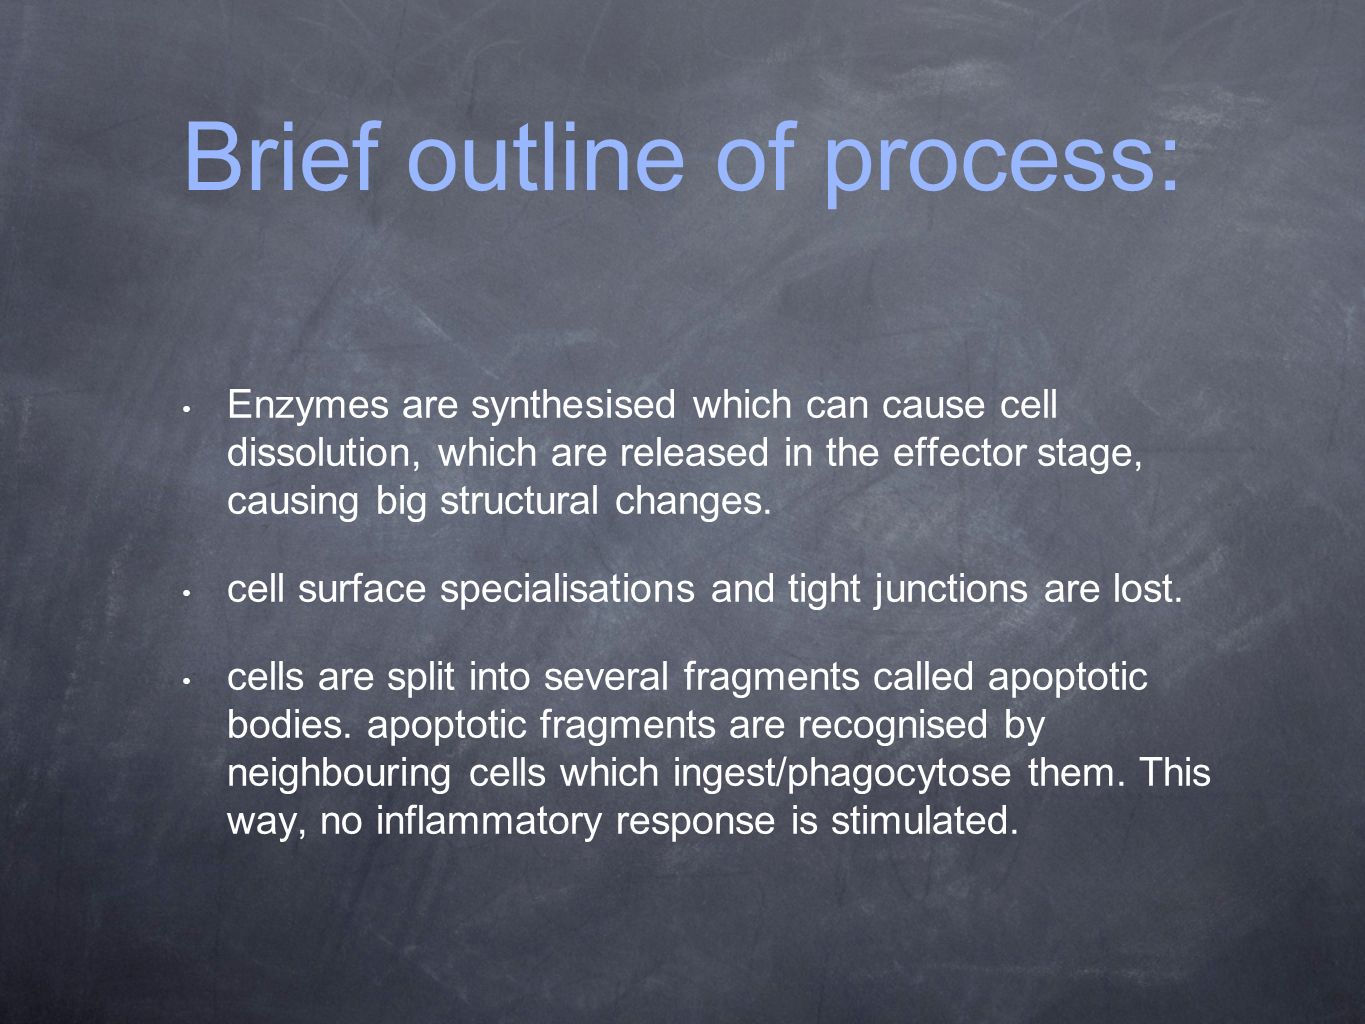 Brief outline of process: Enzymes are synthesised which can cause cell dissolution, which are released in the effector stage, causing big structural changes.